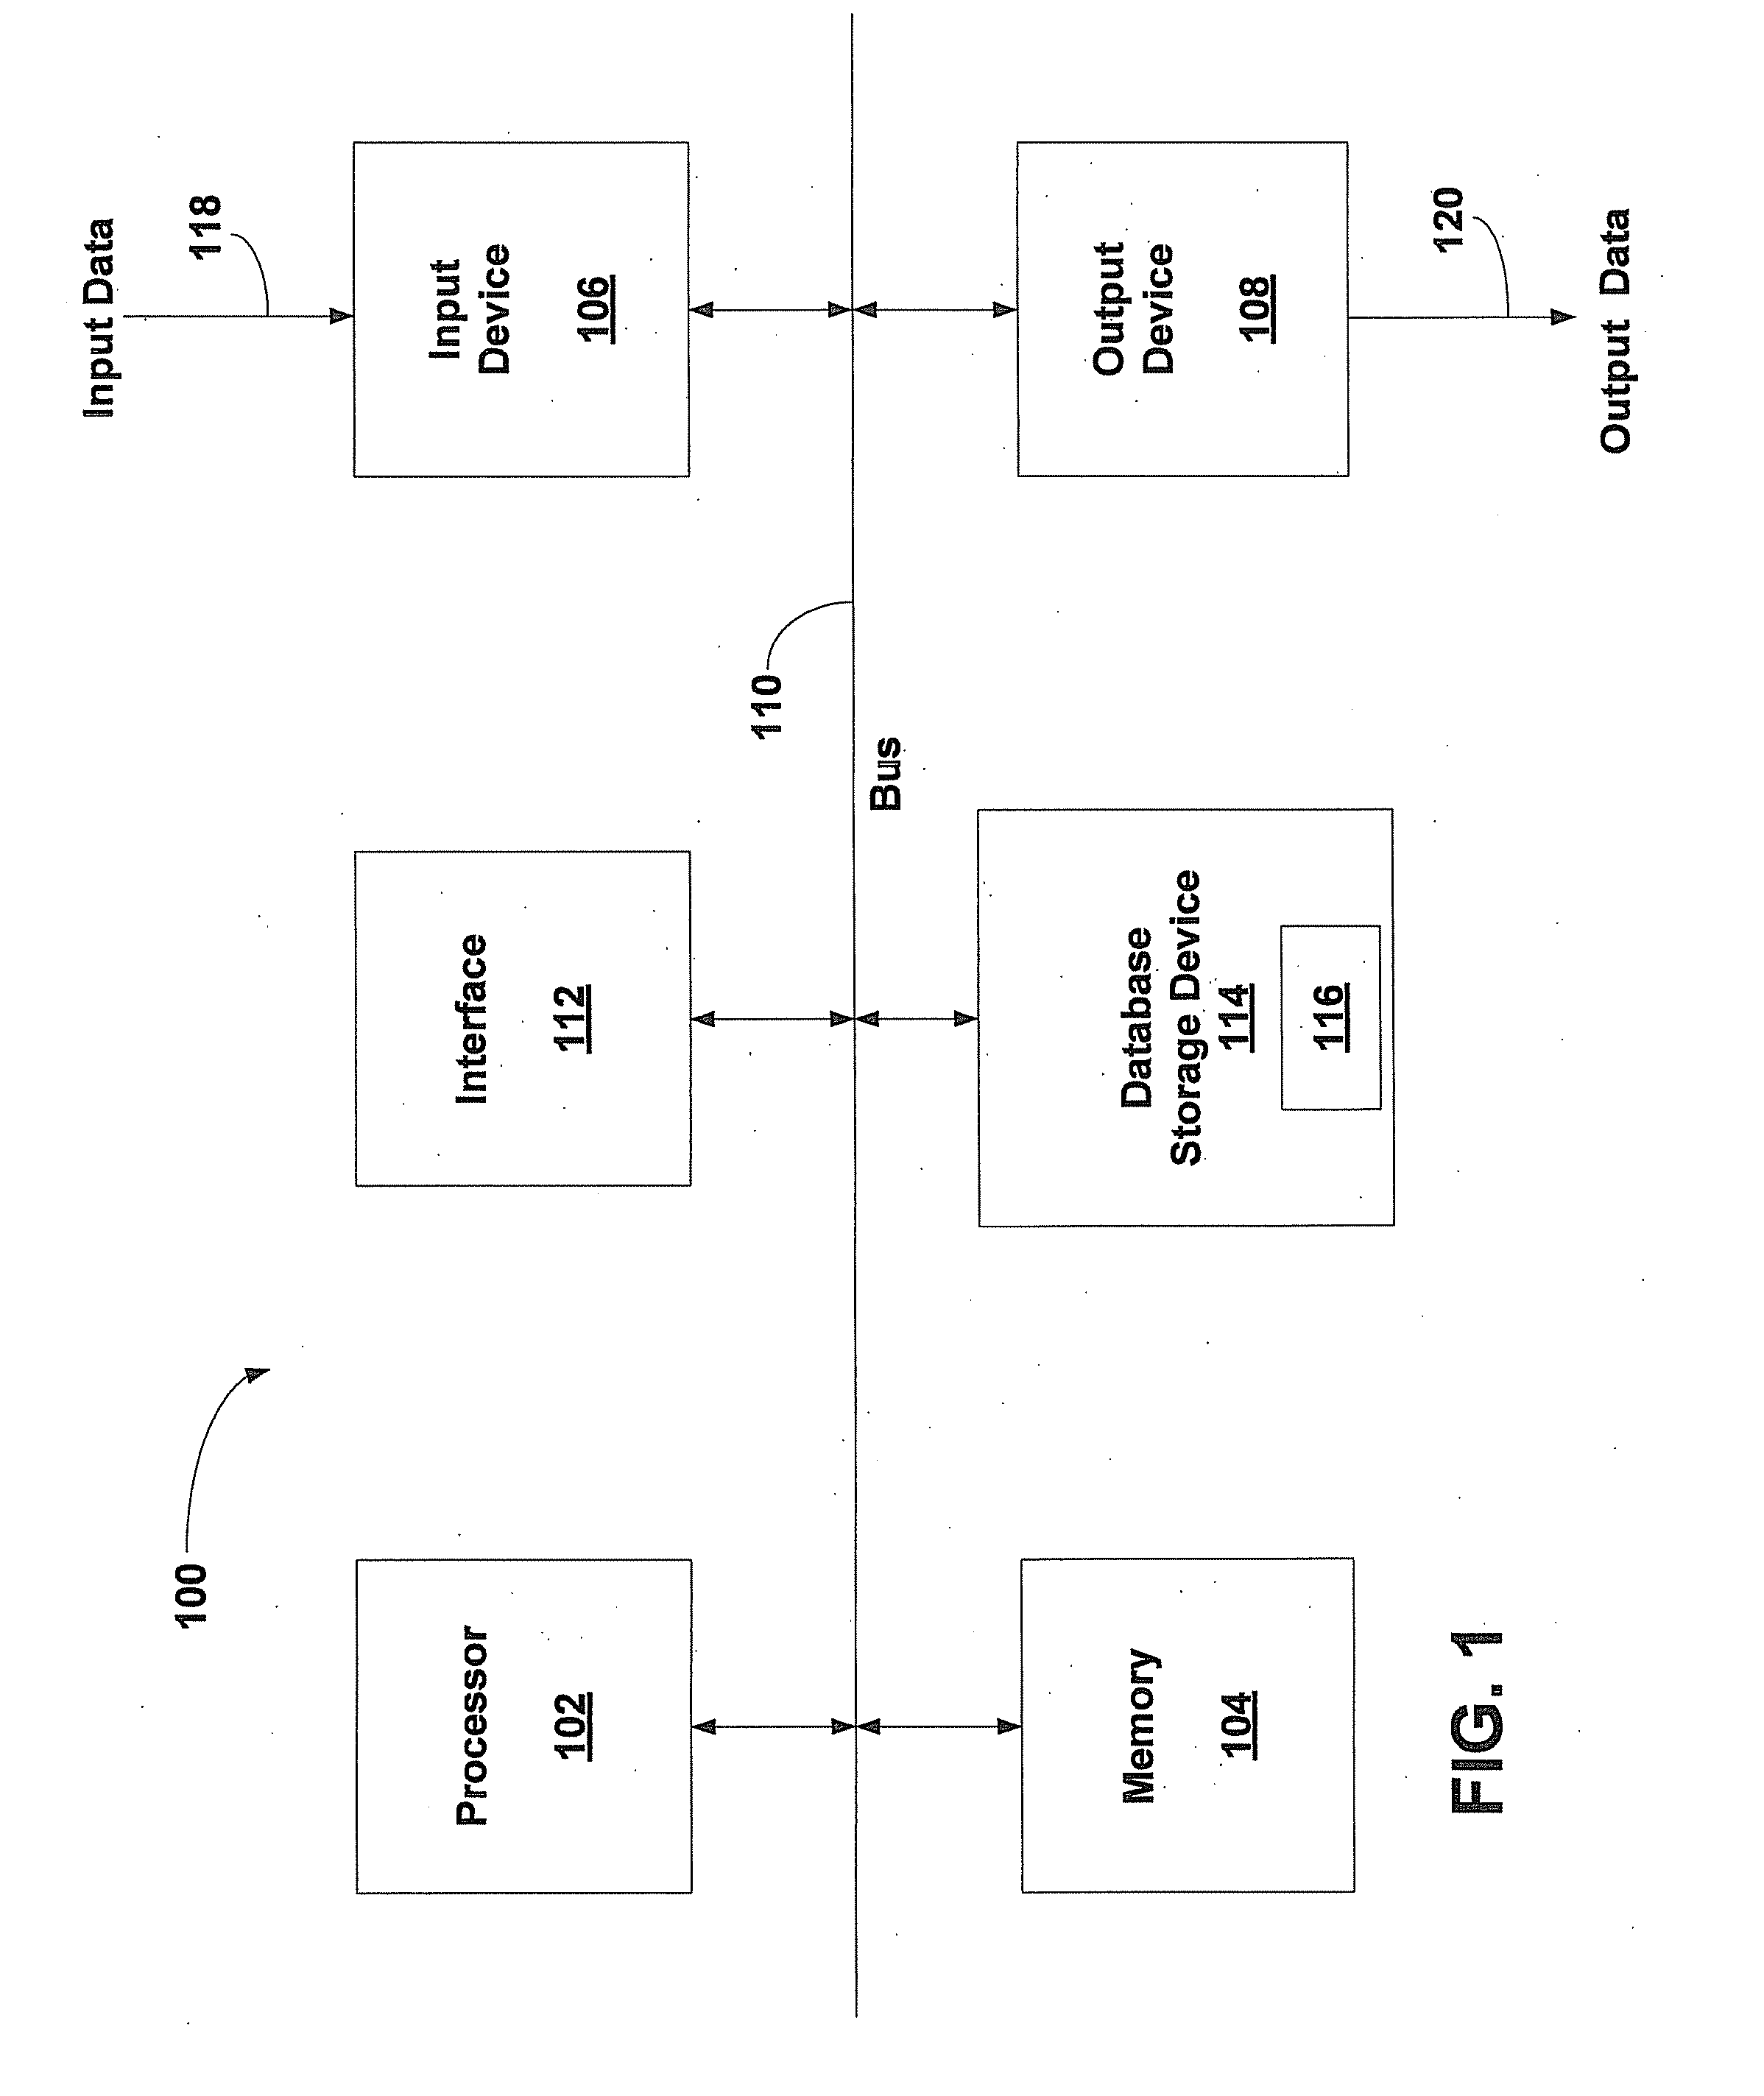 System and method for selecting an insurance carrier